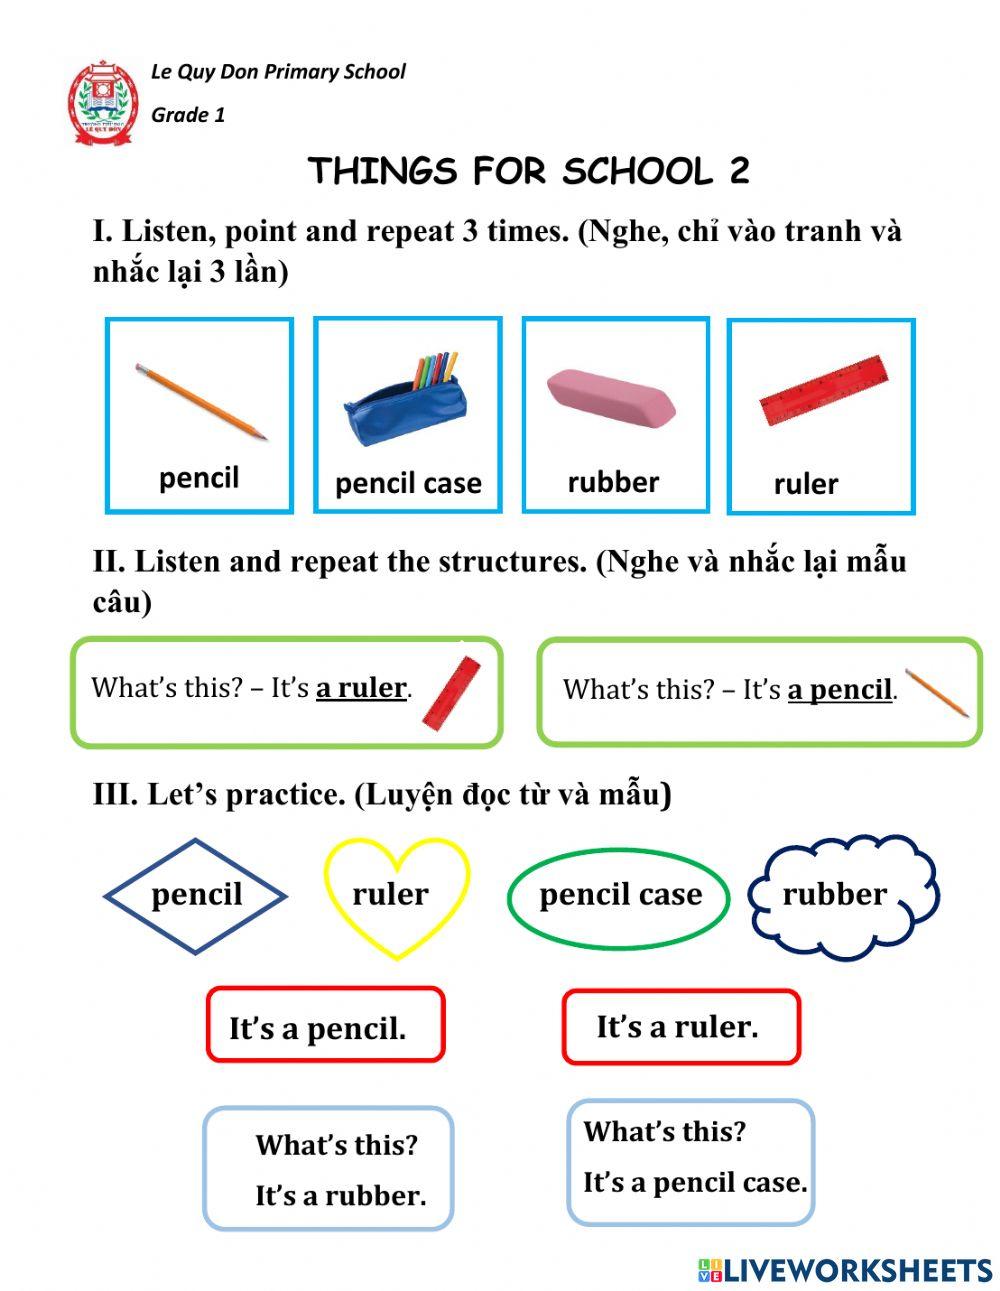 Things for school 2